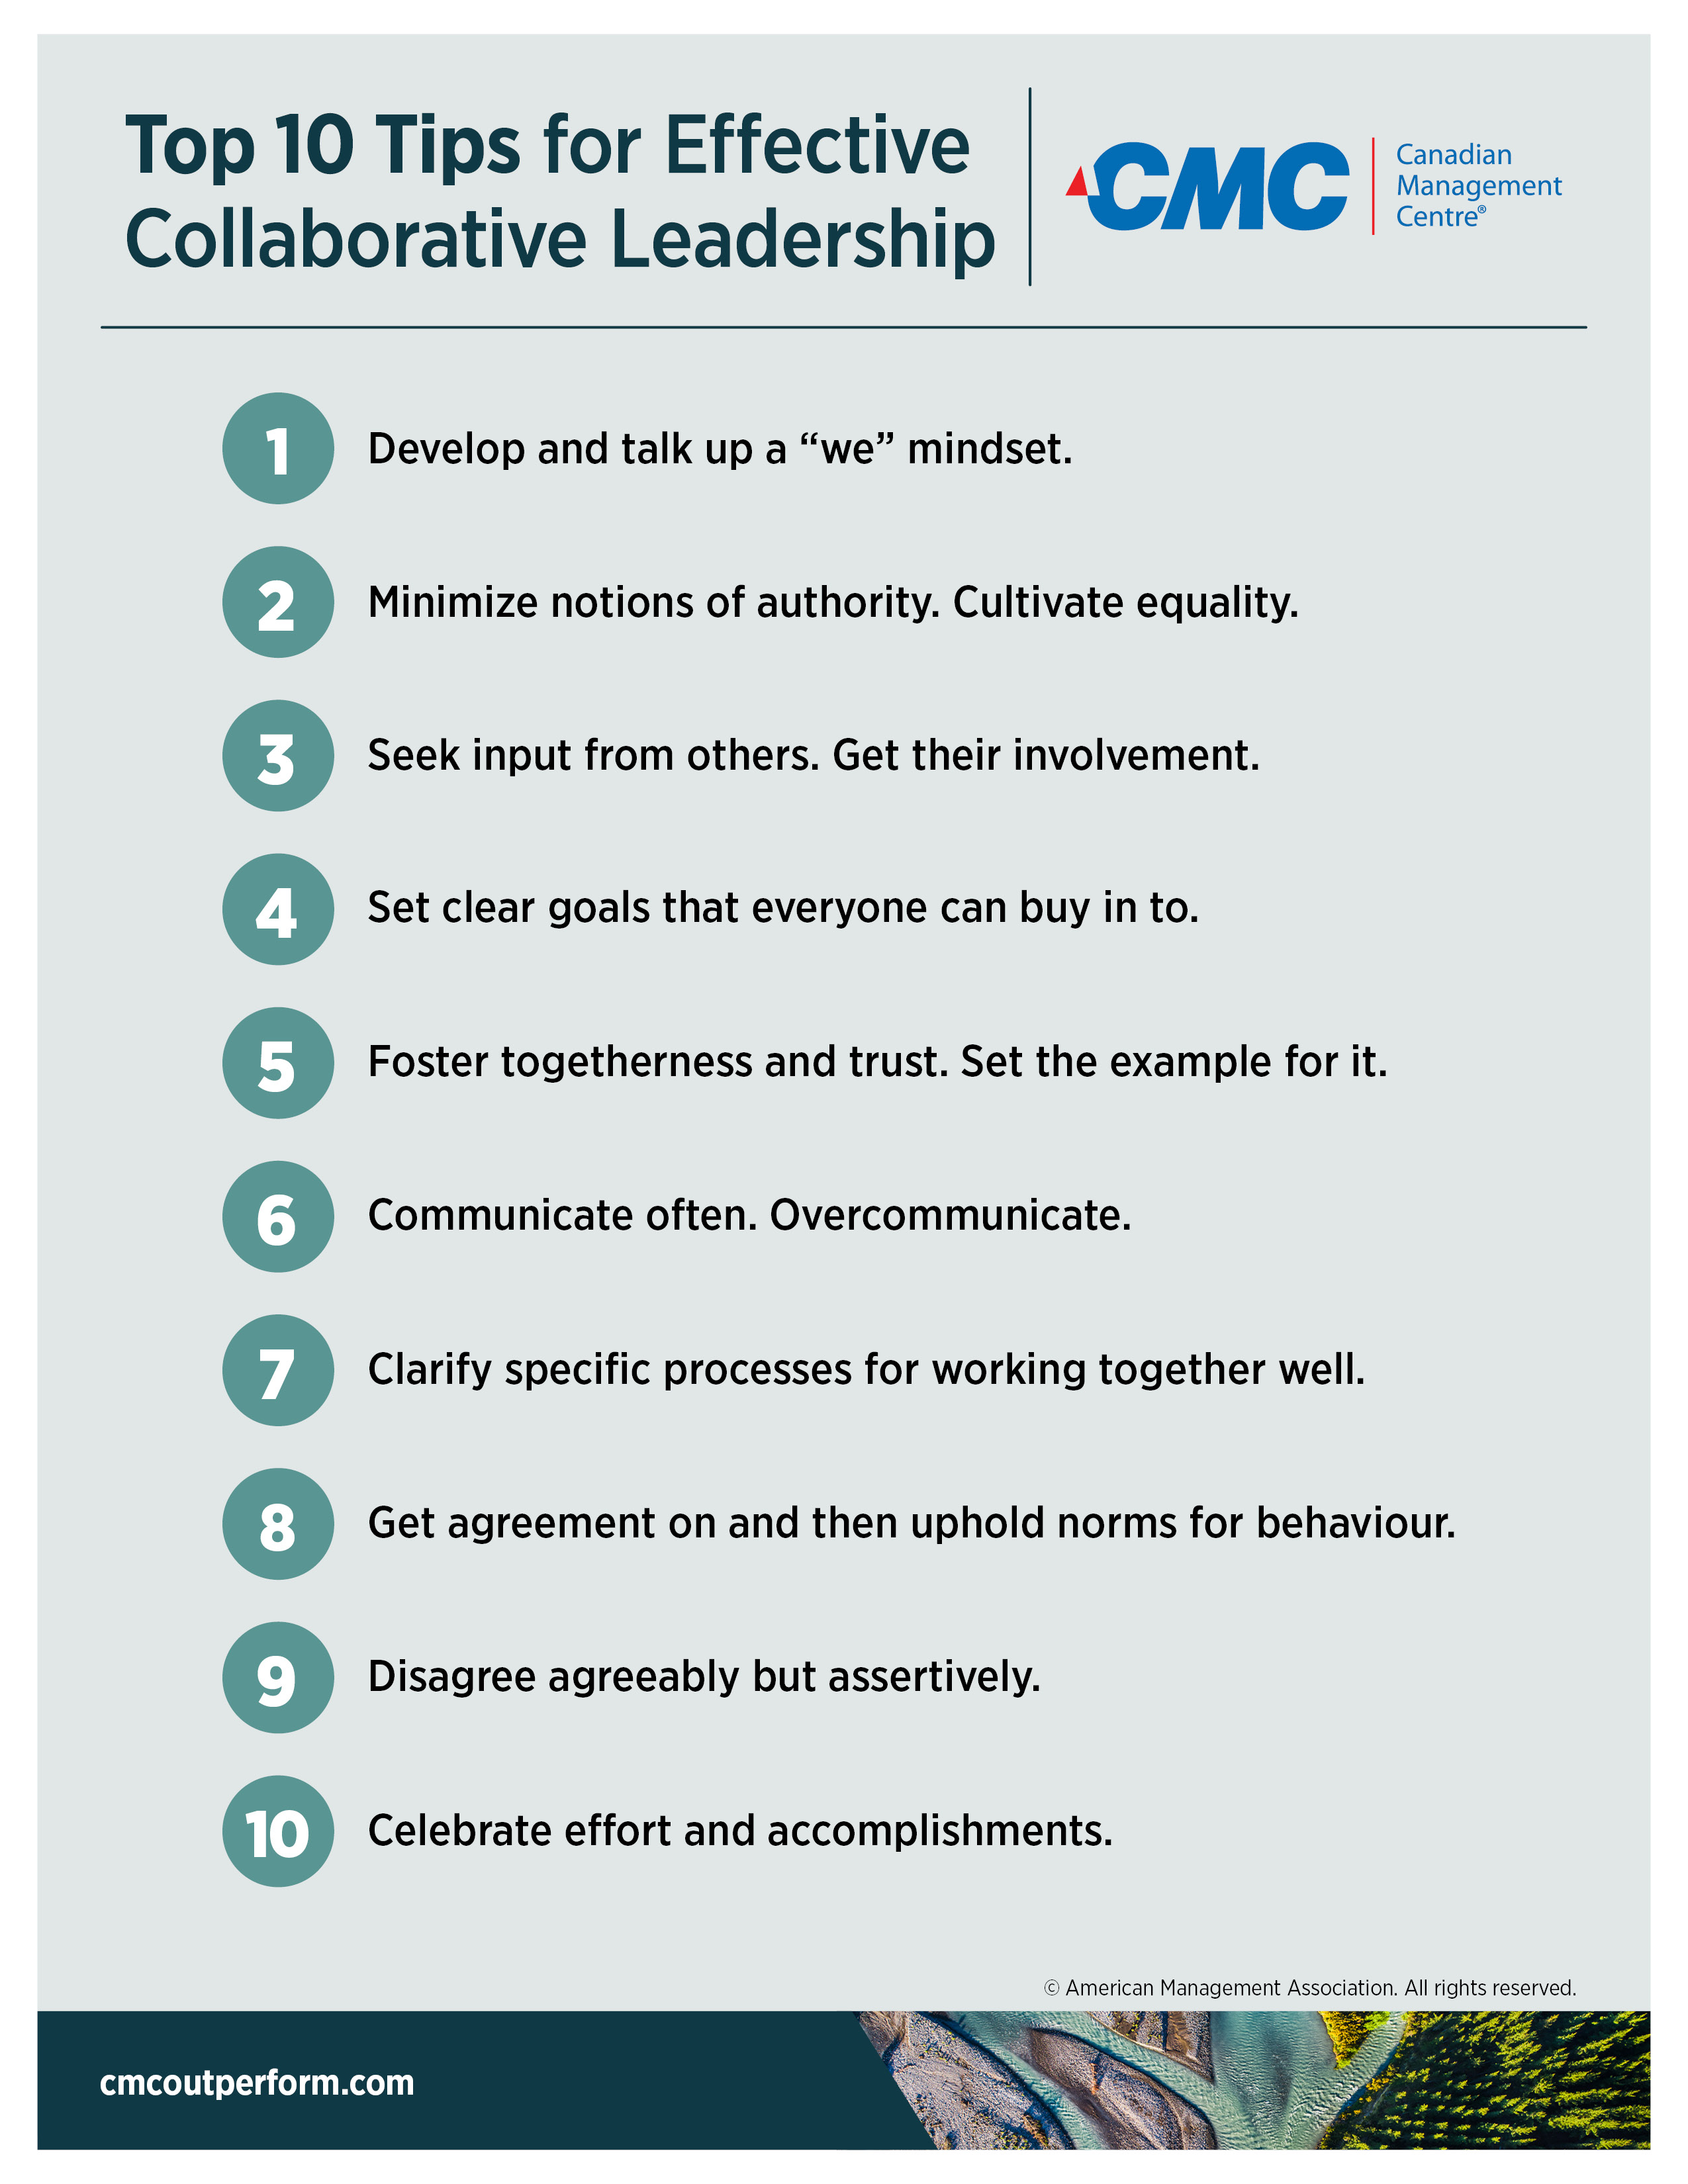 Tips for effective collaborative leadership image